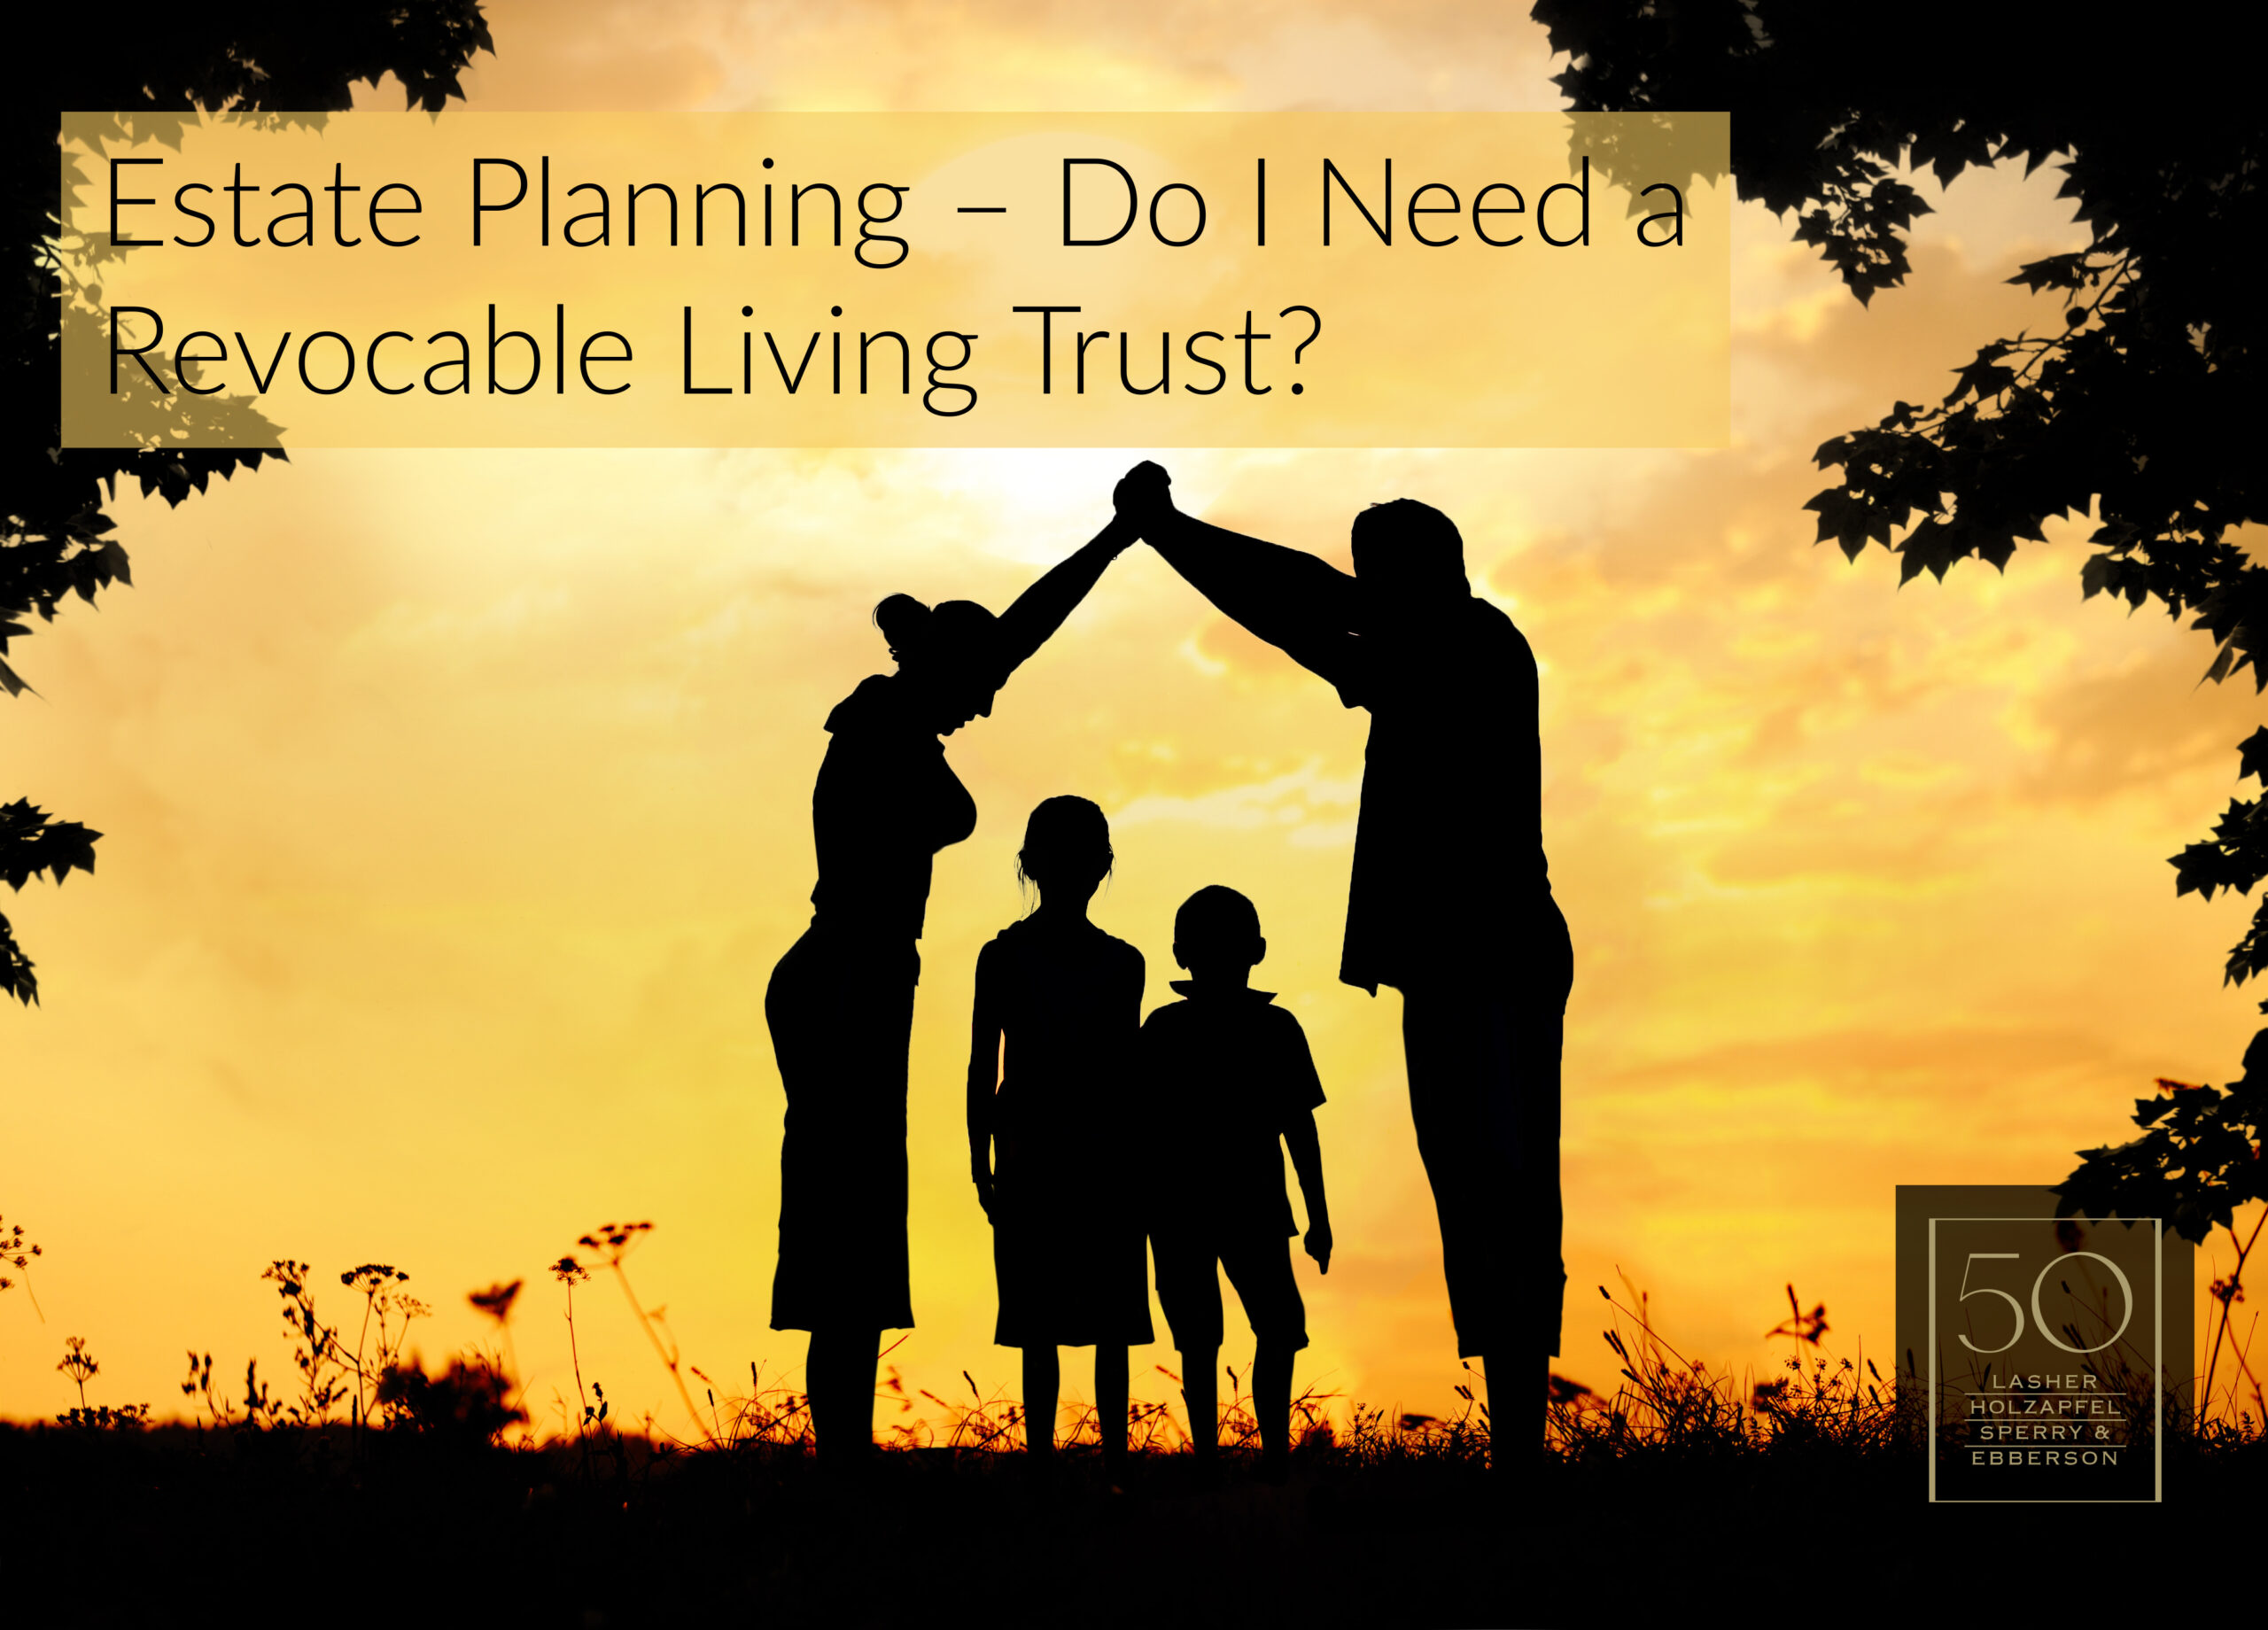 Estate Planning – Do I Need a Revocable Living Trust?